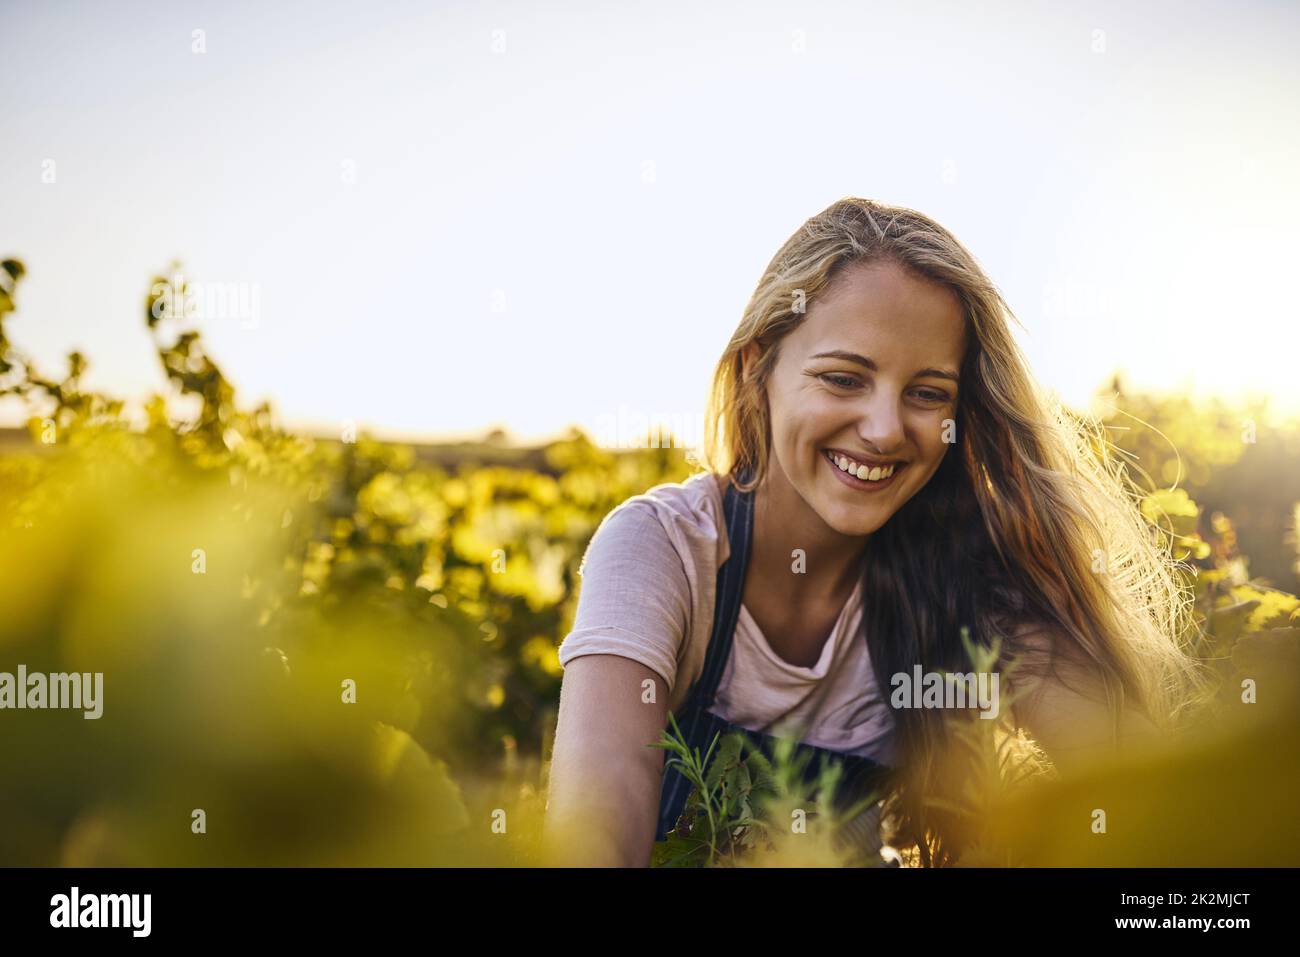 She knows her plants. Shot of a young woman tending to her crops on a farm. Stock Photo